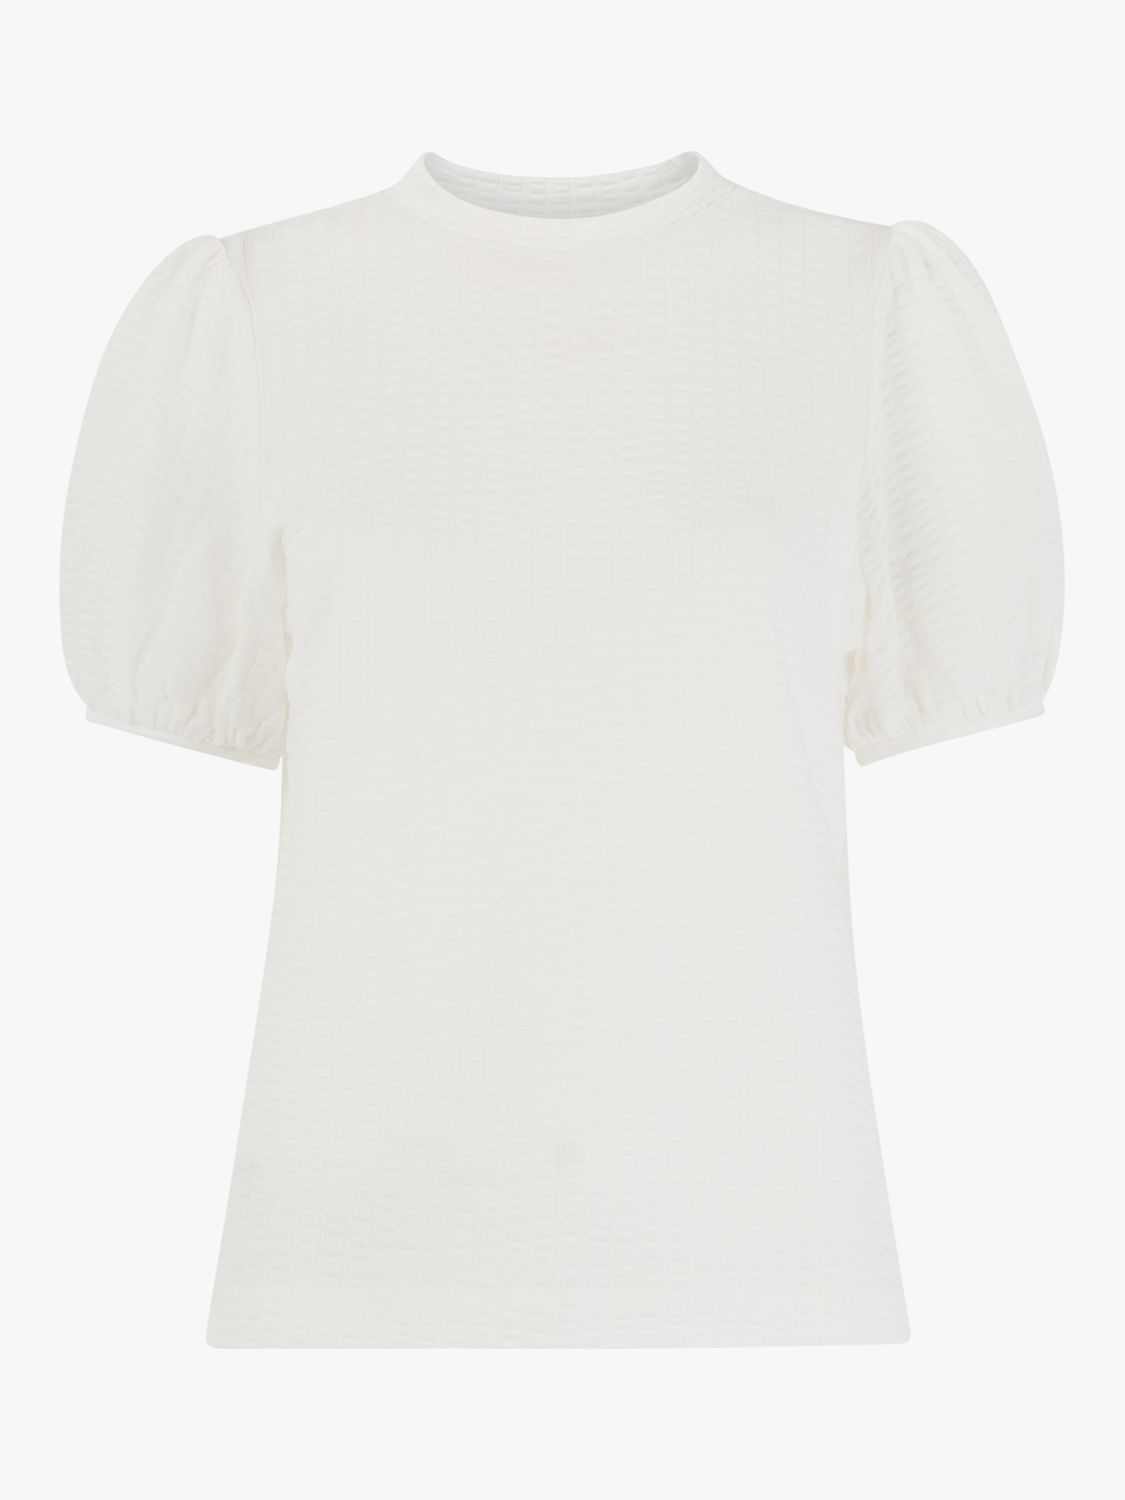 Buy Whistles Textured Puff Sleeve Top, White Online at johnlewis.com